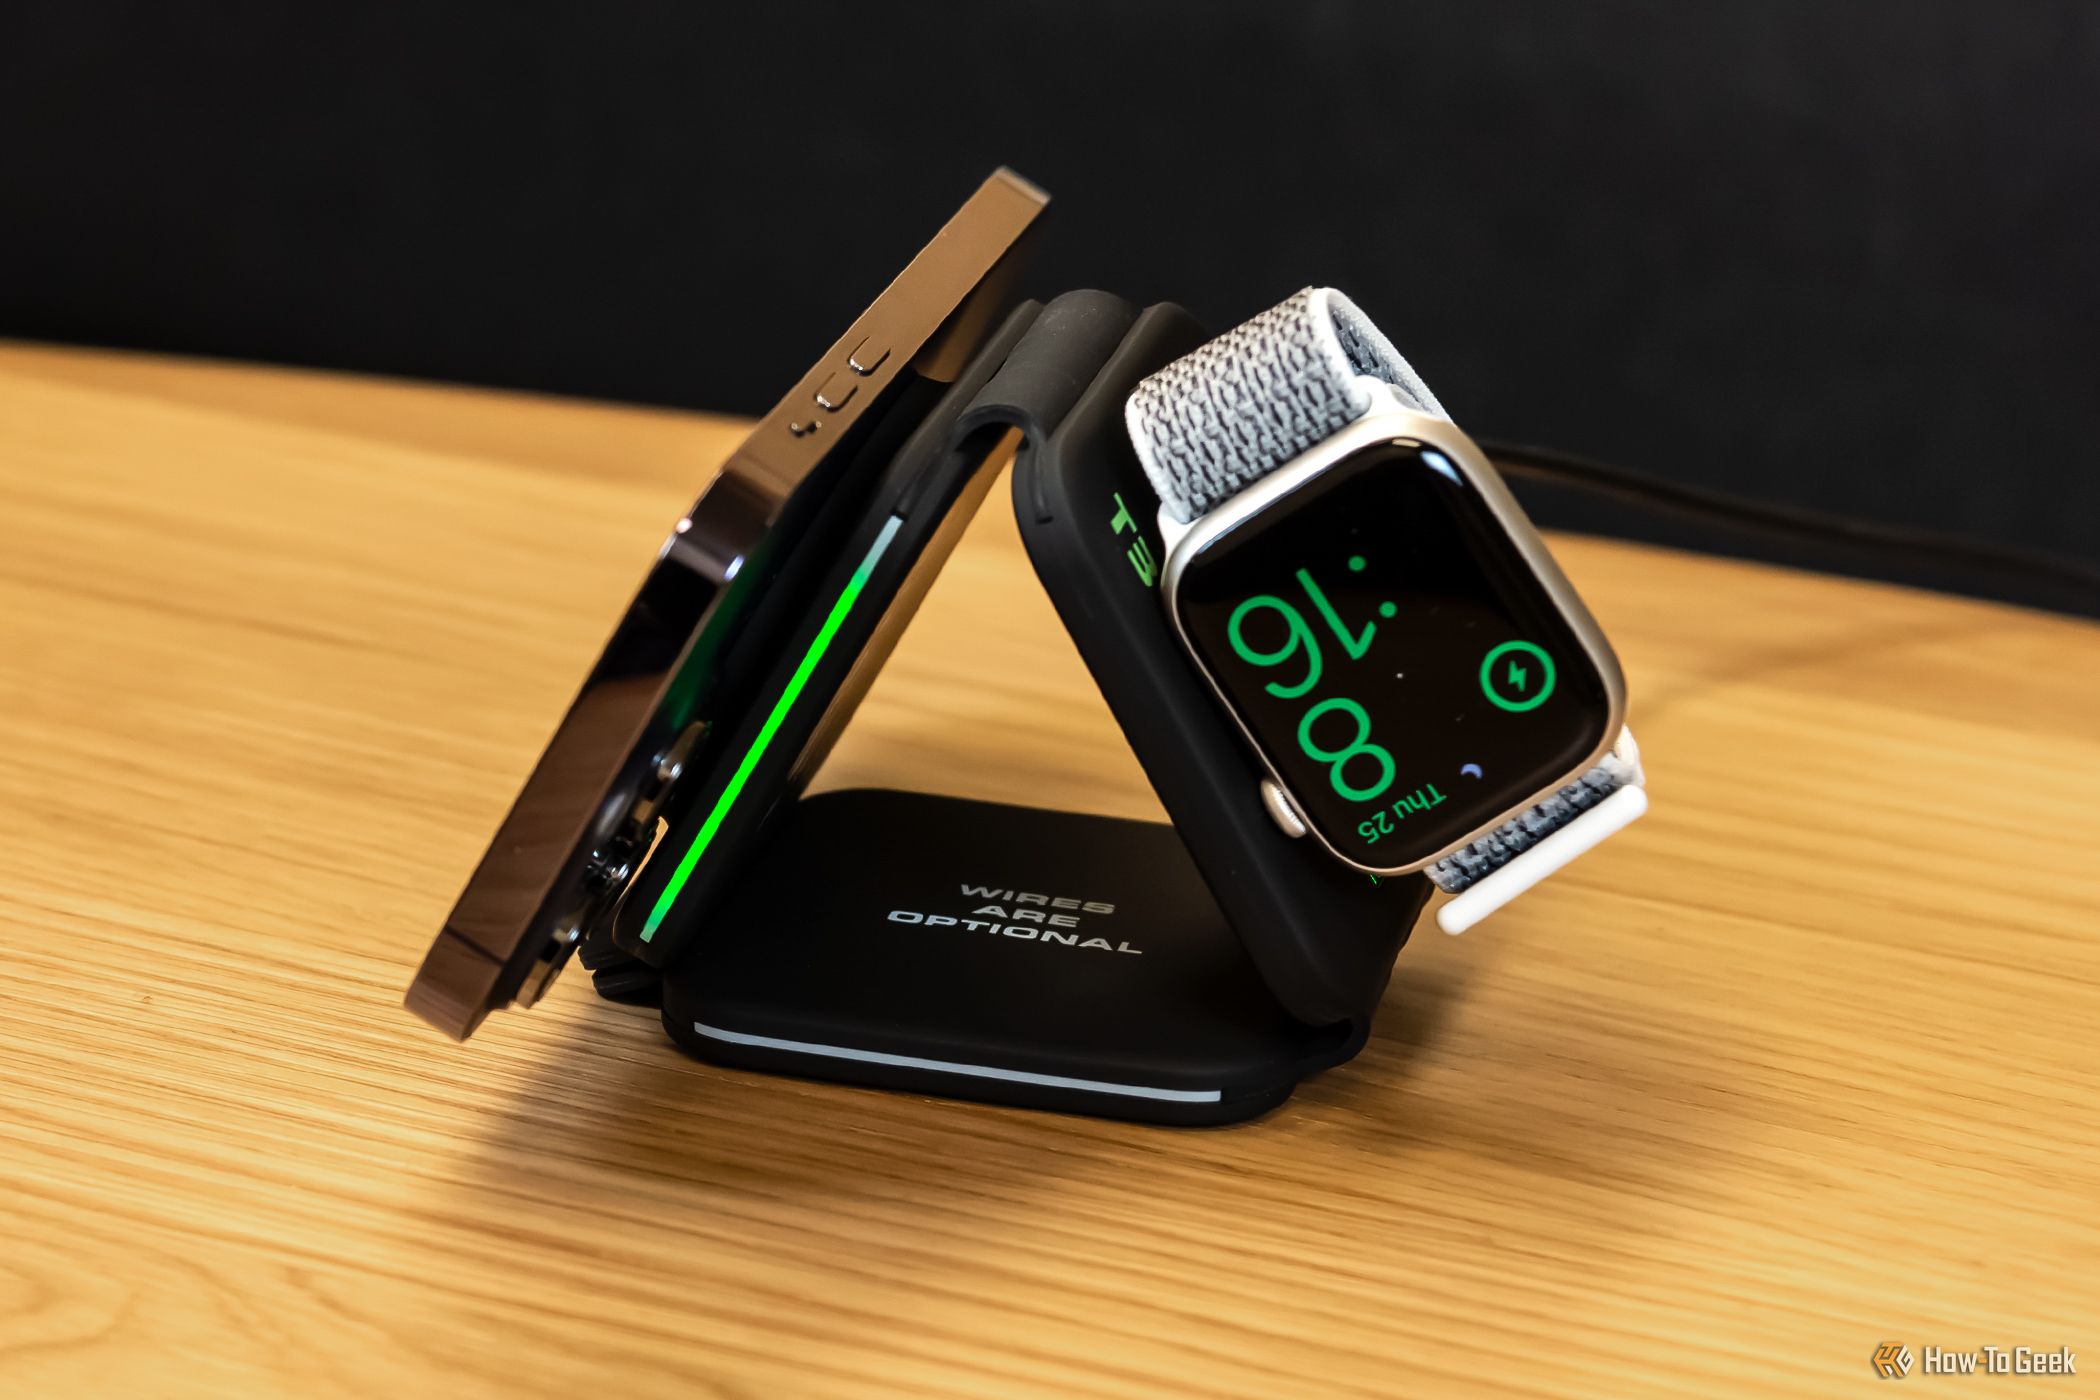 The folded Infinacore T3 3-in-1 Wireless Charging Station holding an iPhone and Apple Watch